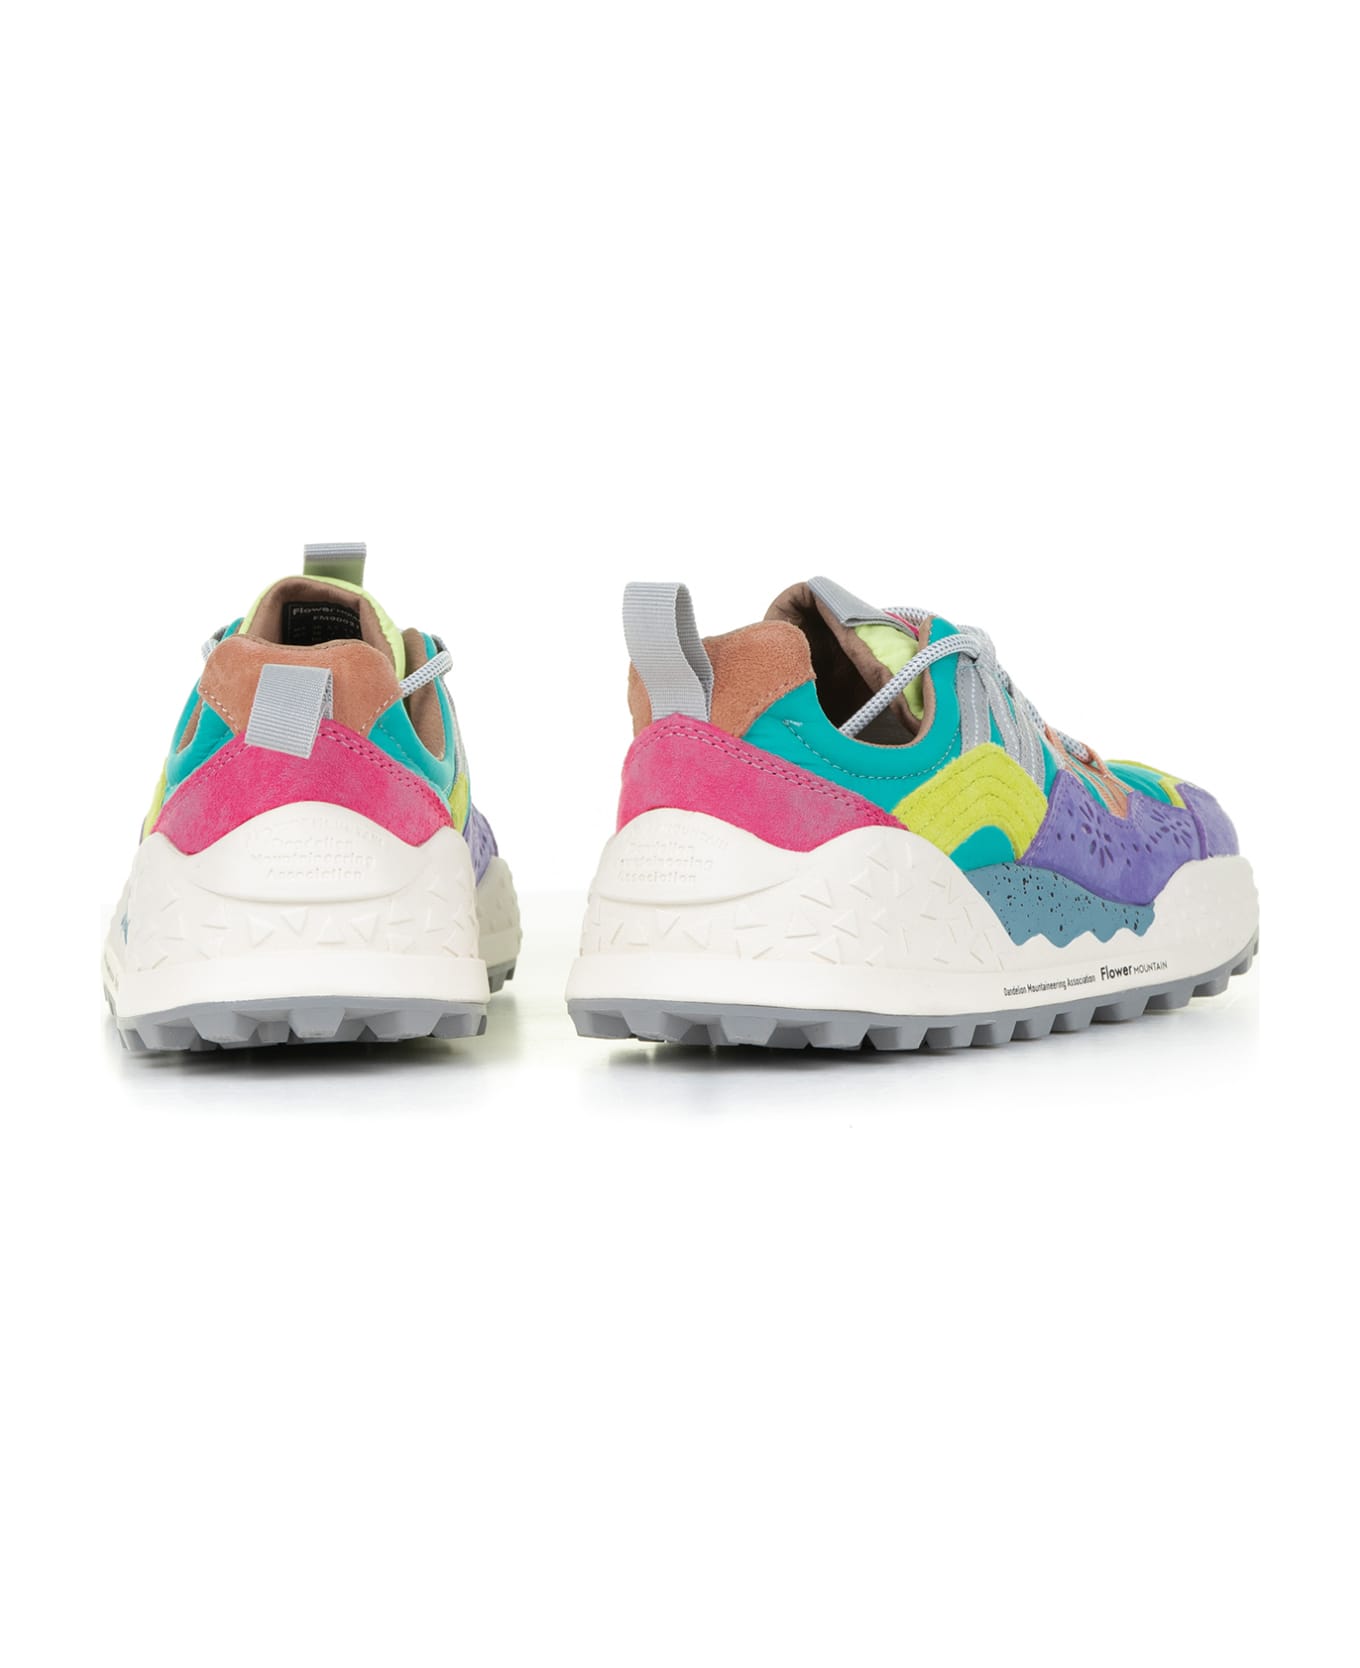 Flower Mountain Multicolored Washi Sneakers In Suede And Nylon - LILAC GREEN スニーカー